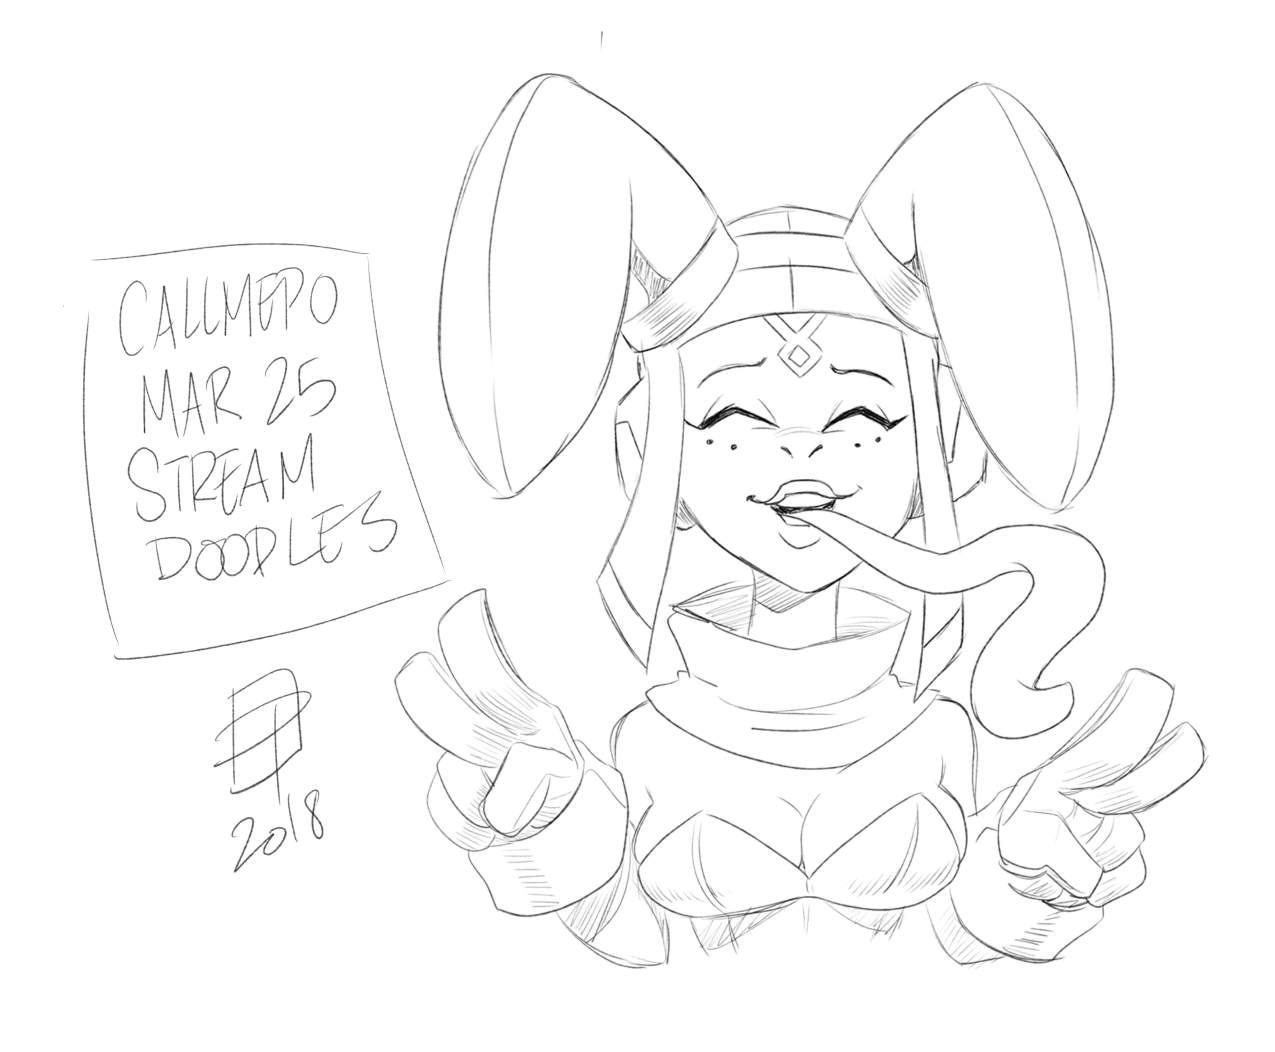 callmepo: Just finished a pre-Easter doodle stream from my pinupsushi art channel